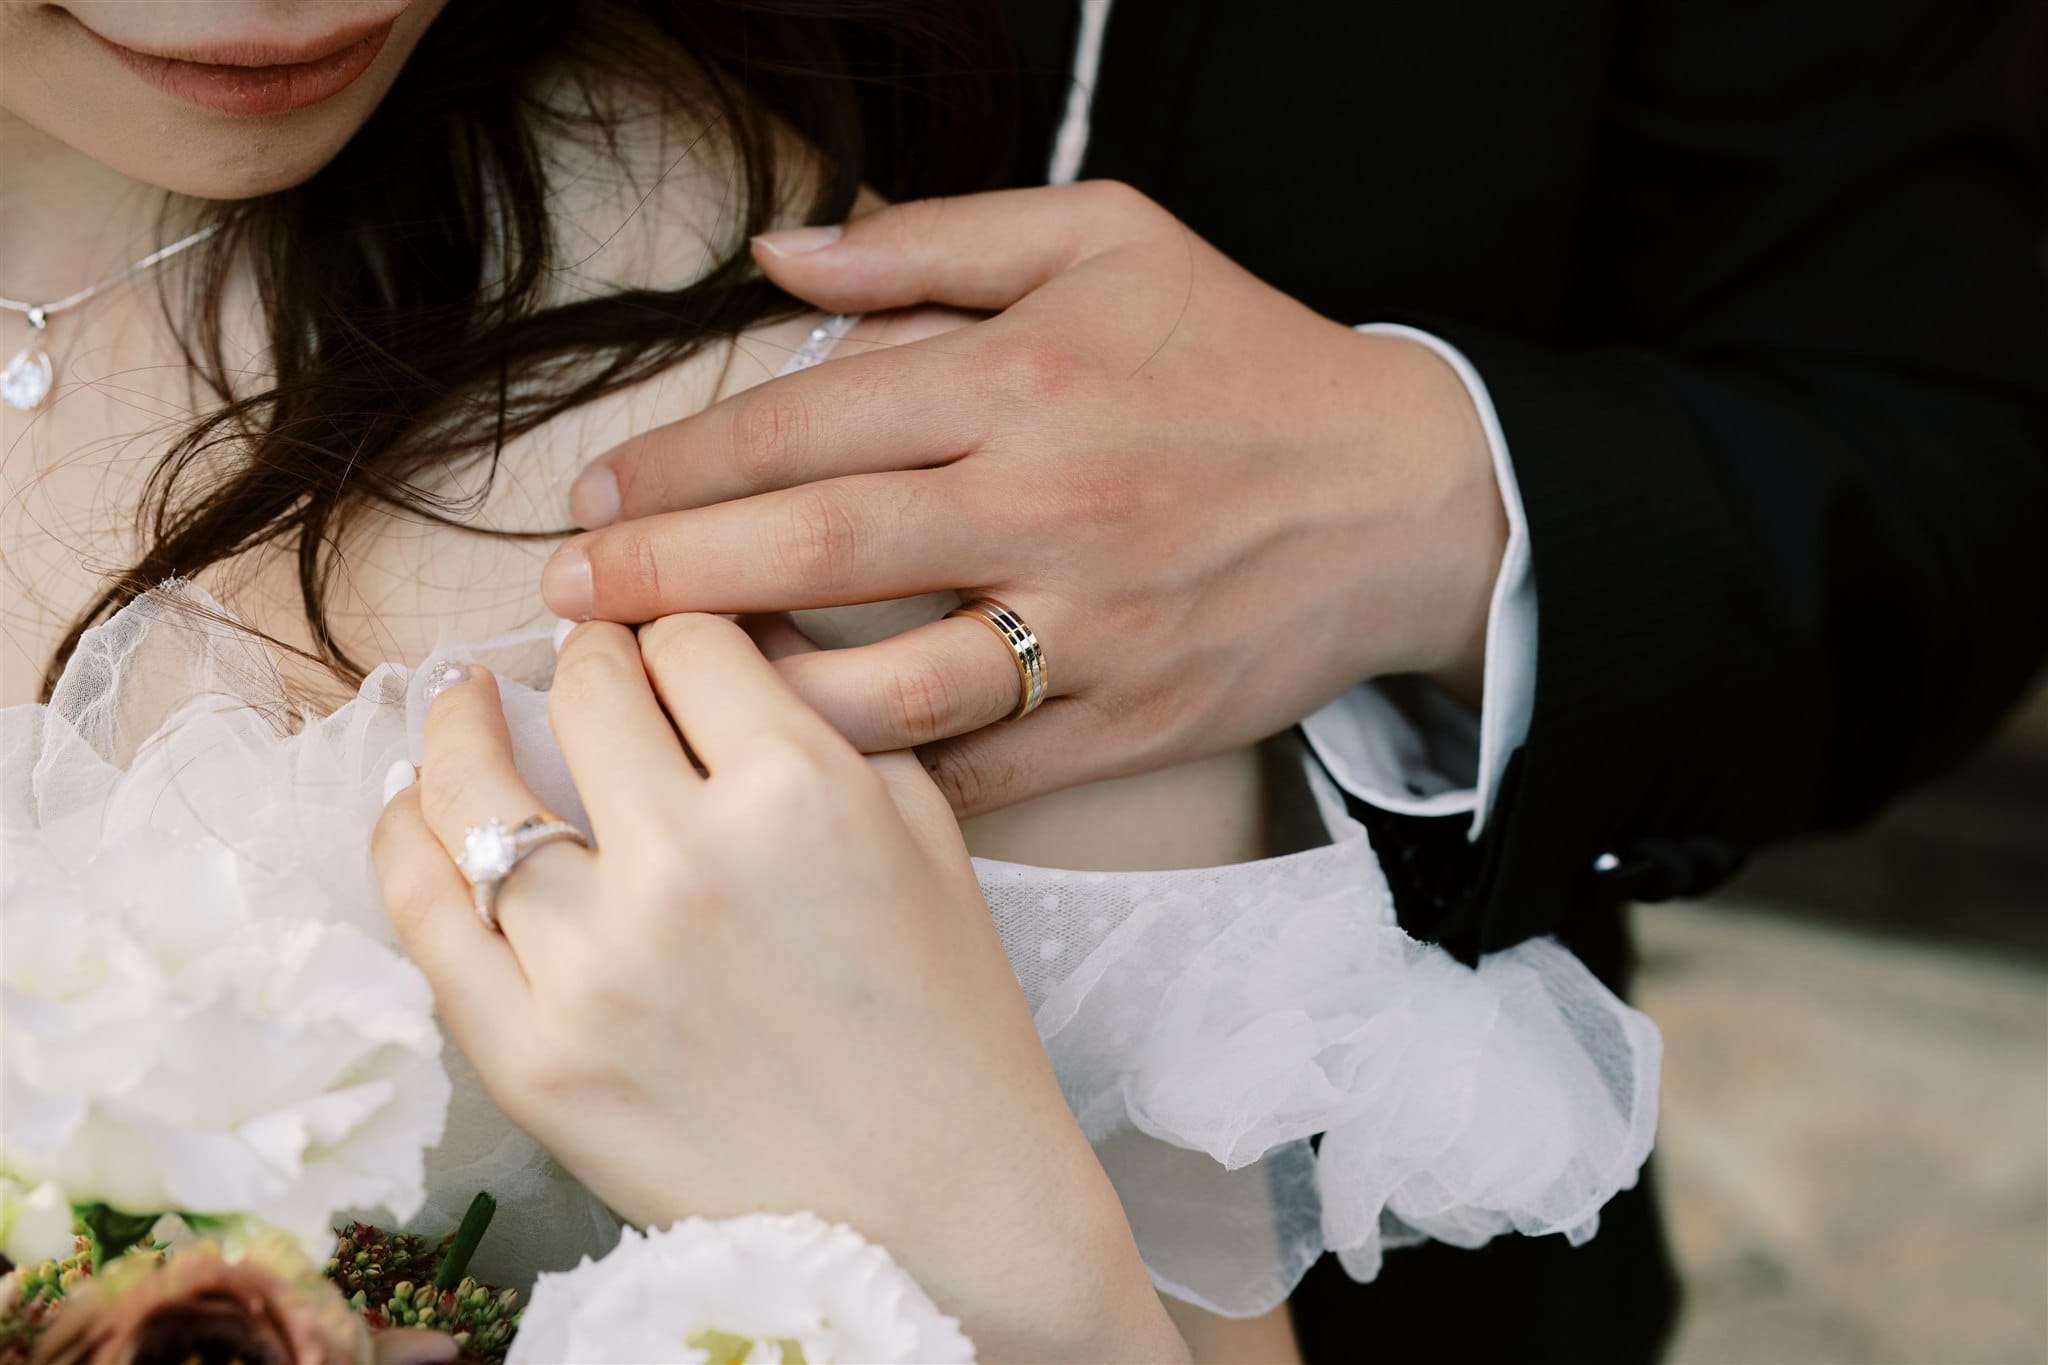 Kyoto Tokyo Japan Elopement Wedding Photographer, Planner & Videographer | A Japan elopement photographer captures stunning images of a bride and groom showcasing their wedding rings on their hands.